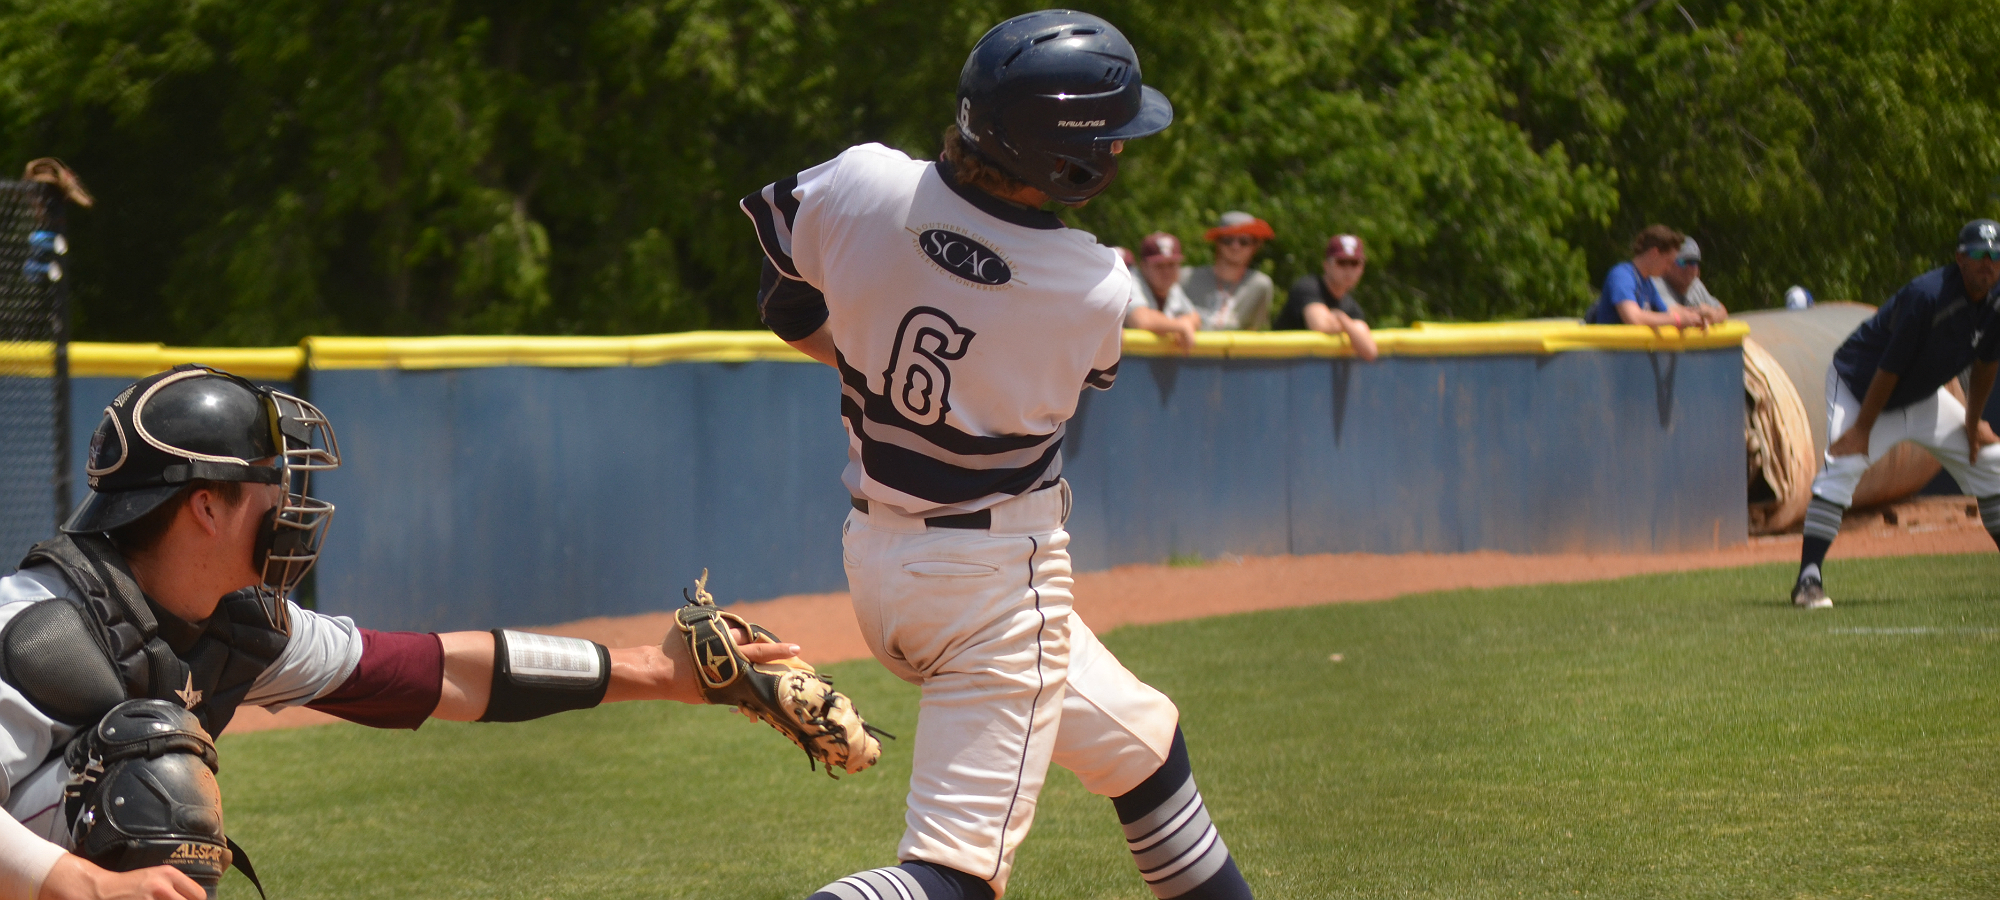 Scioli banged his team-leading 5th home run in game two. That tied the game for the Crusaders a second time.